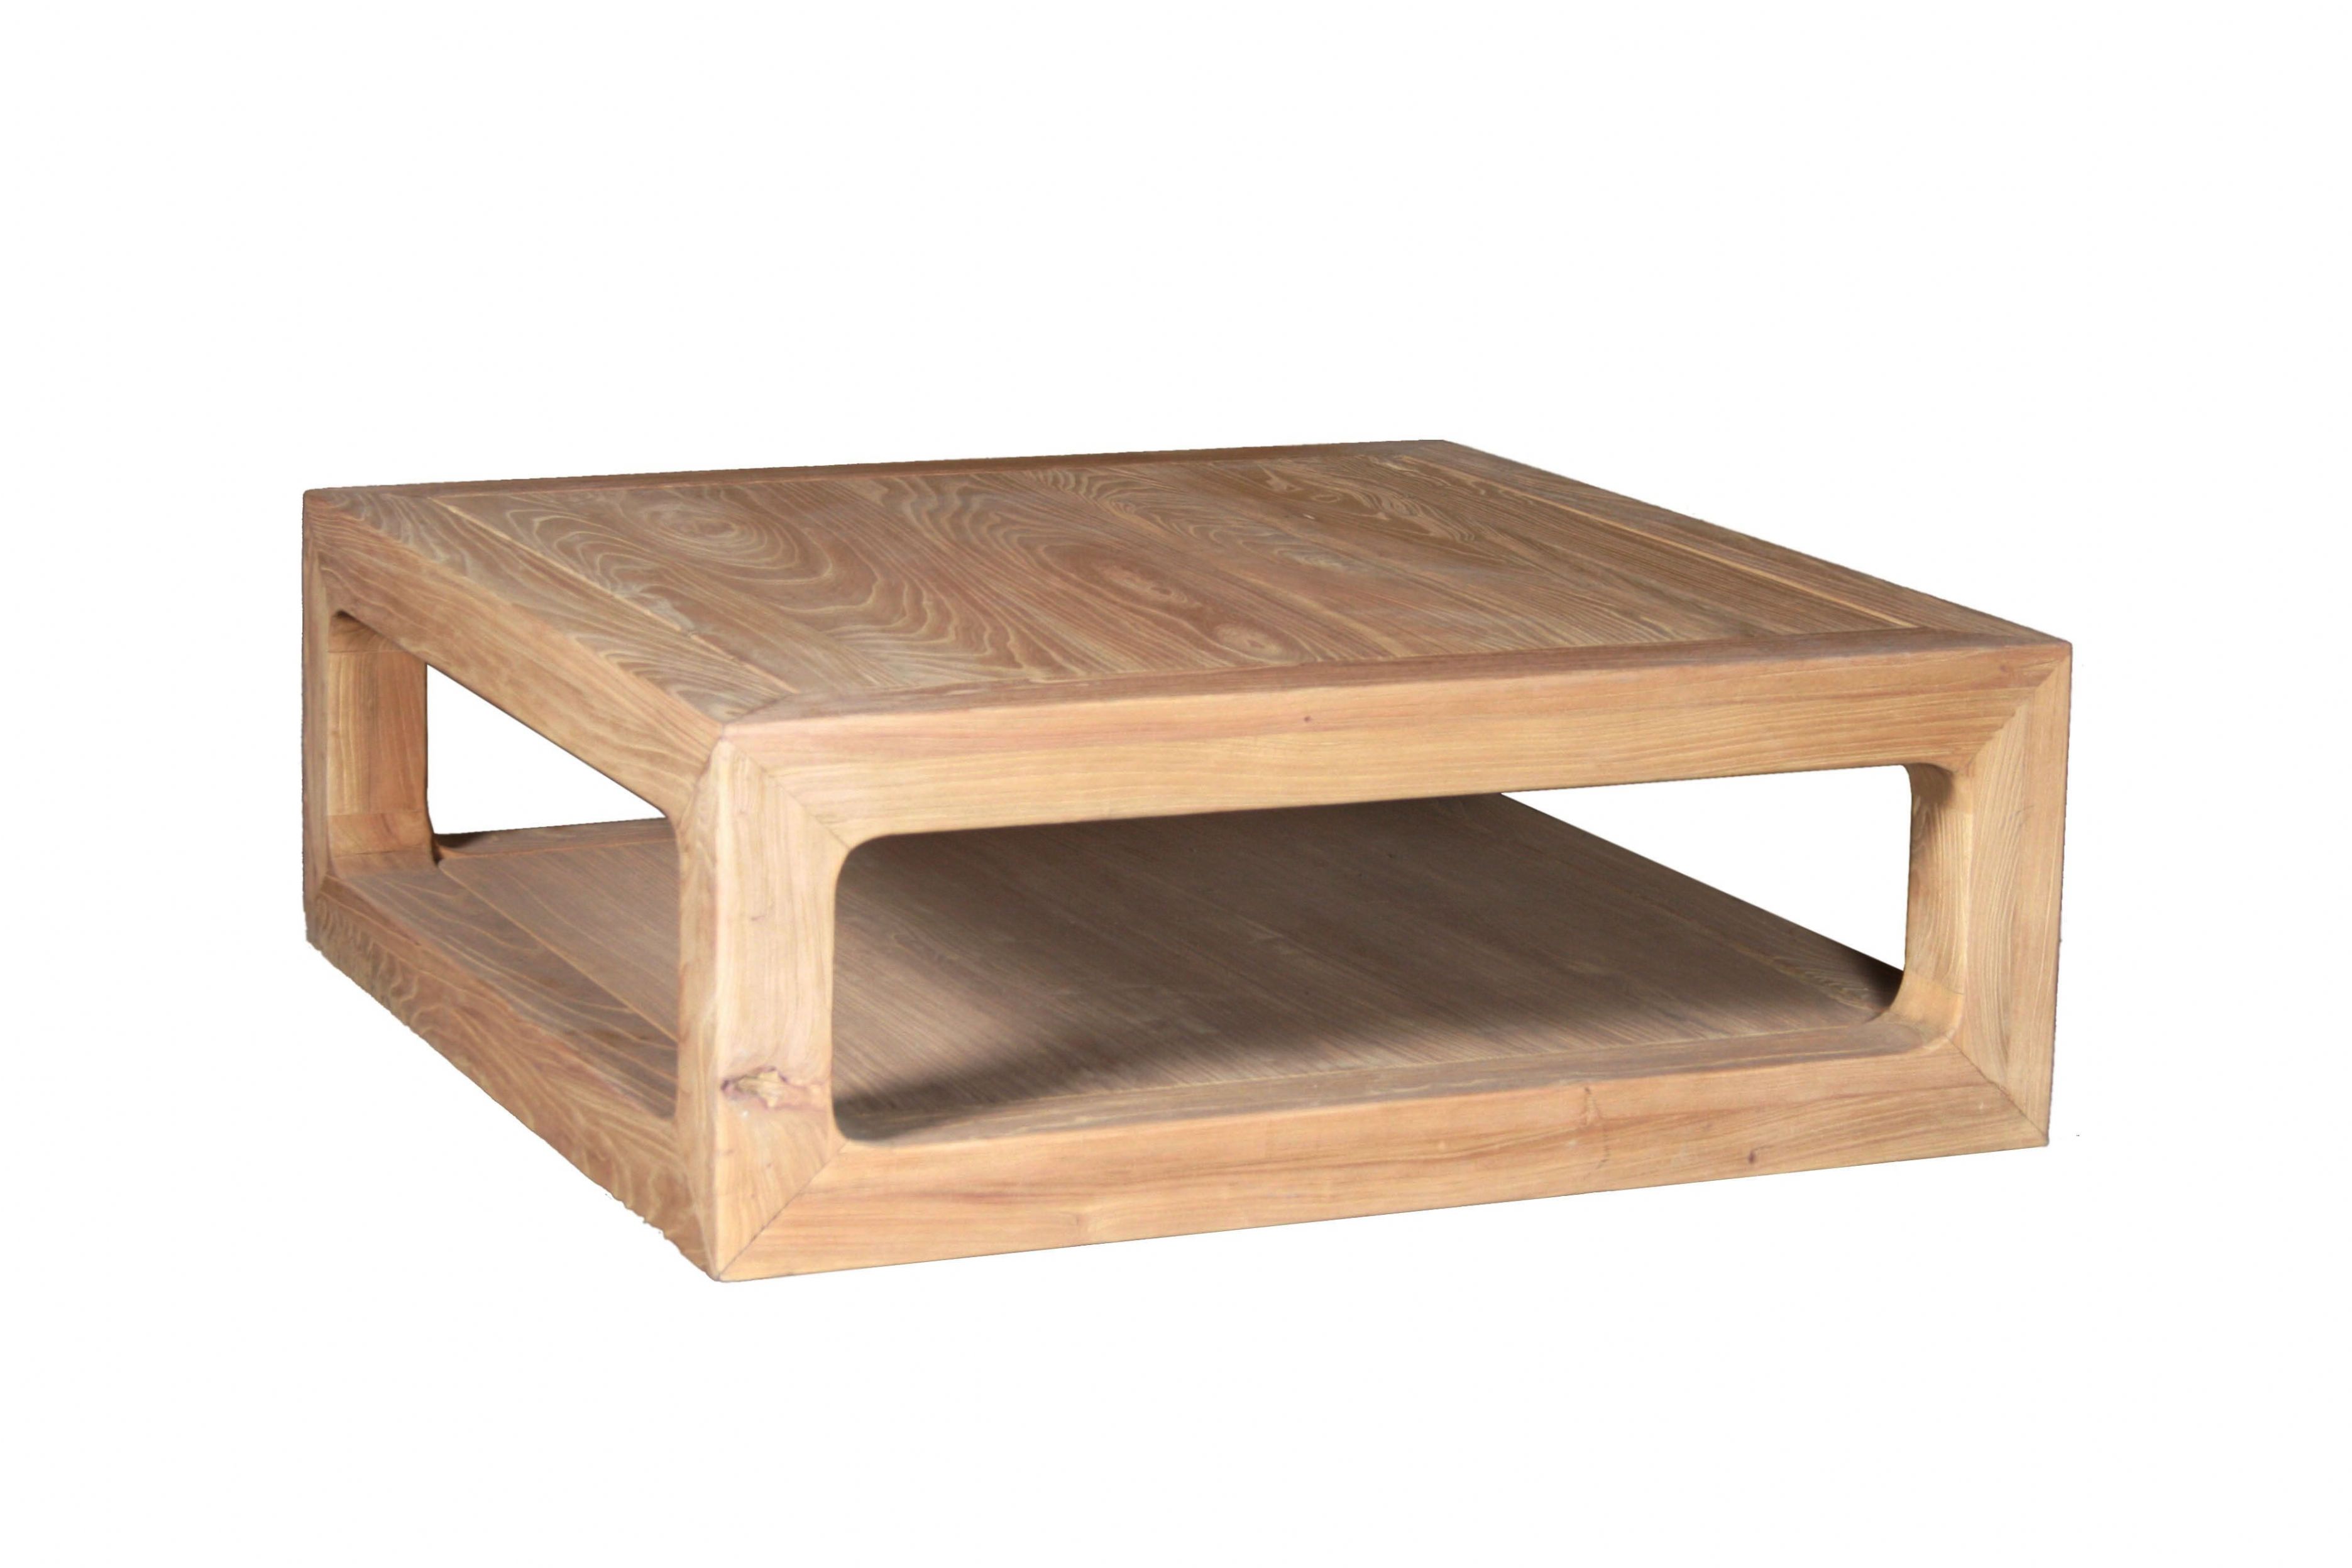 wooden coffee table designs photo - 6